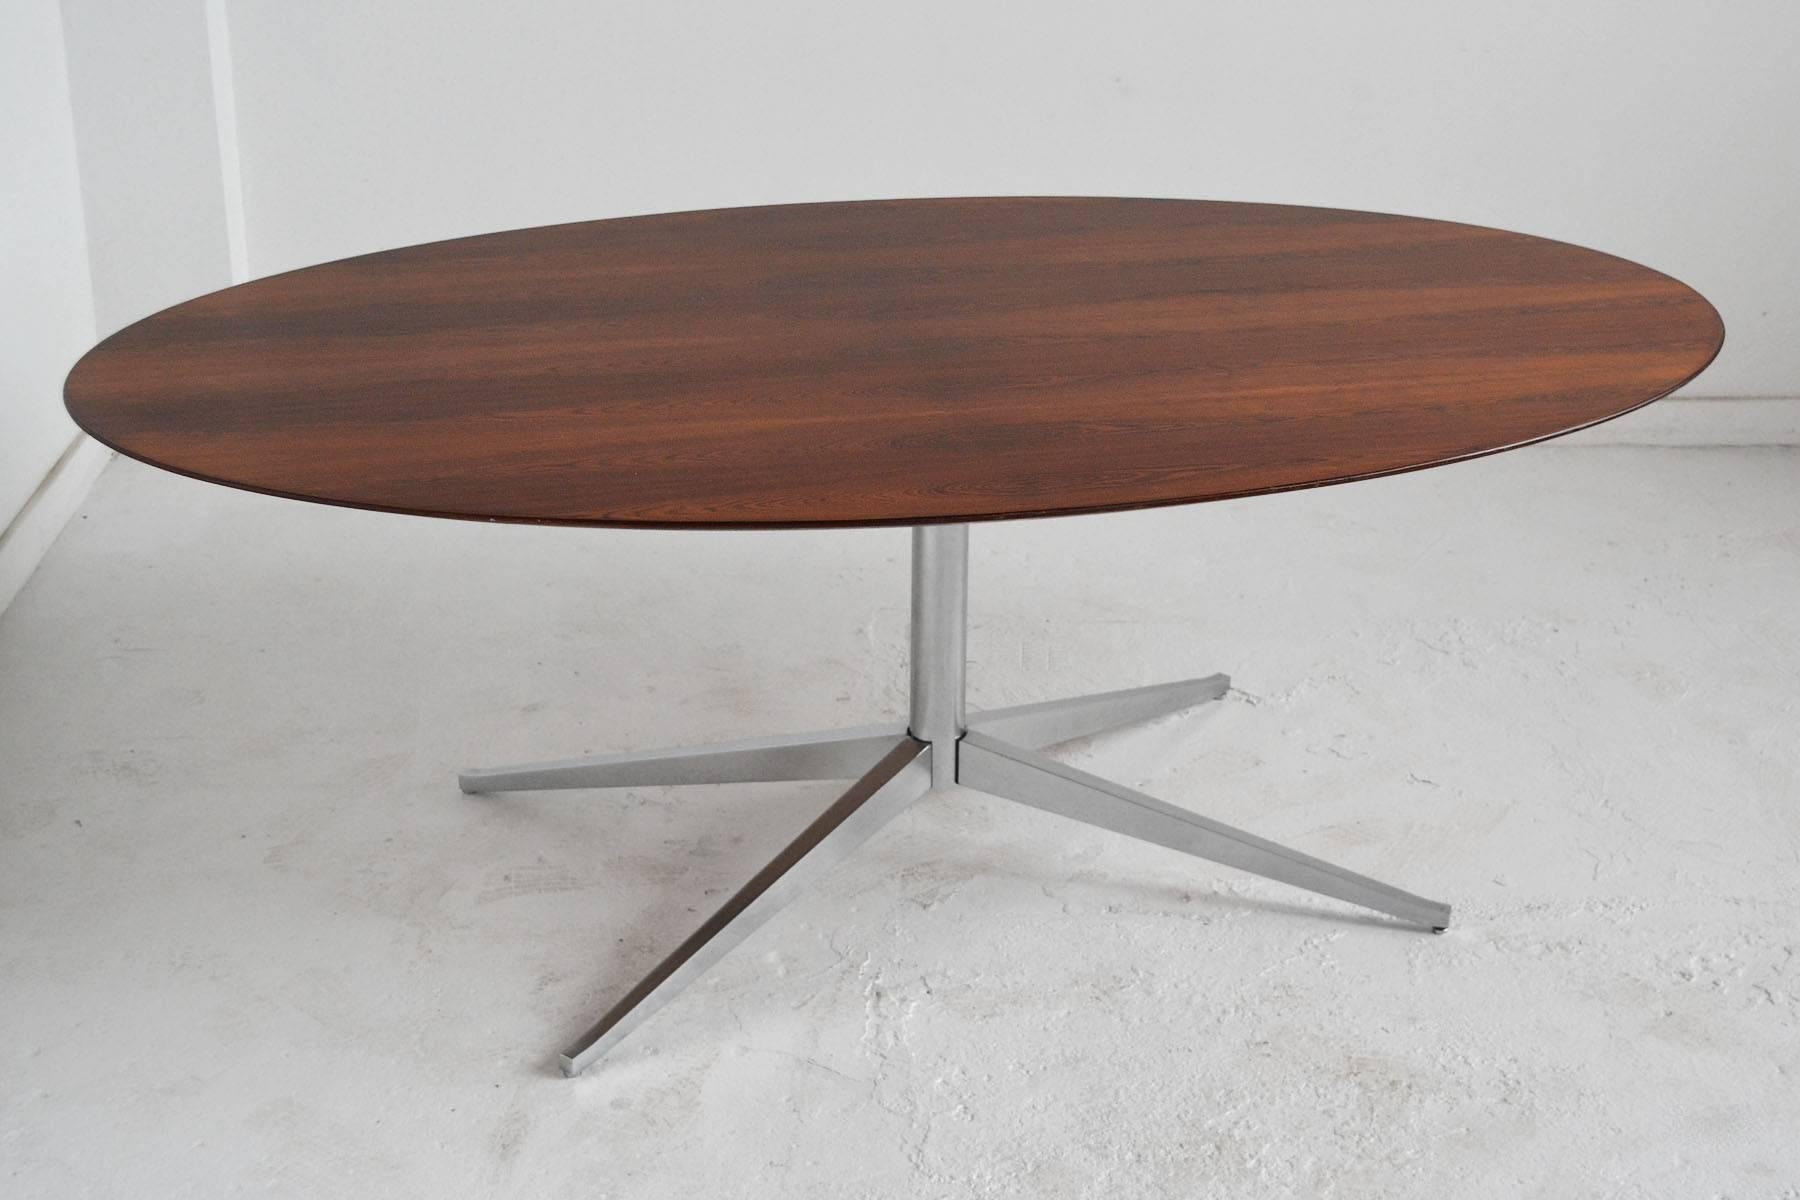 The beauty of the elegant form is equalled by the rich rosewood top of this table by Florence Knoll. It can serve as a dining table, conference table, or desk. Supported by an X-shaped pedestal base, the top is elliptical in shape and the underside